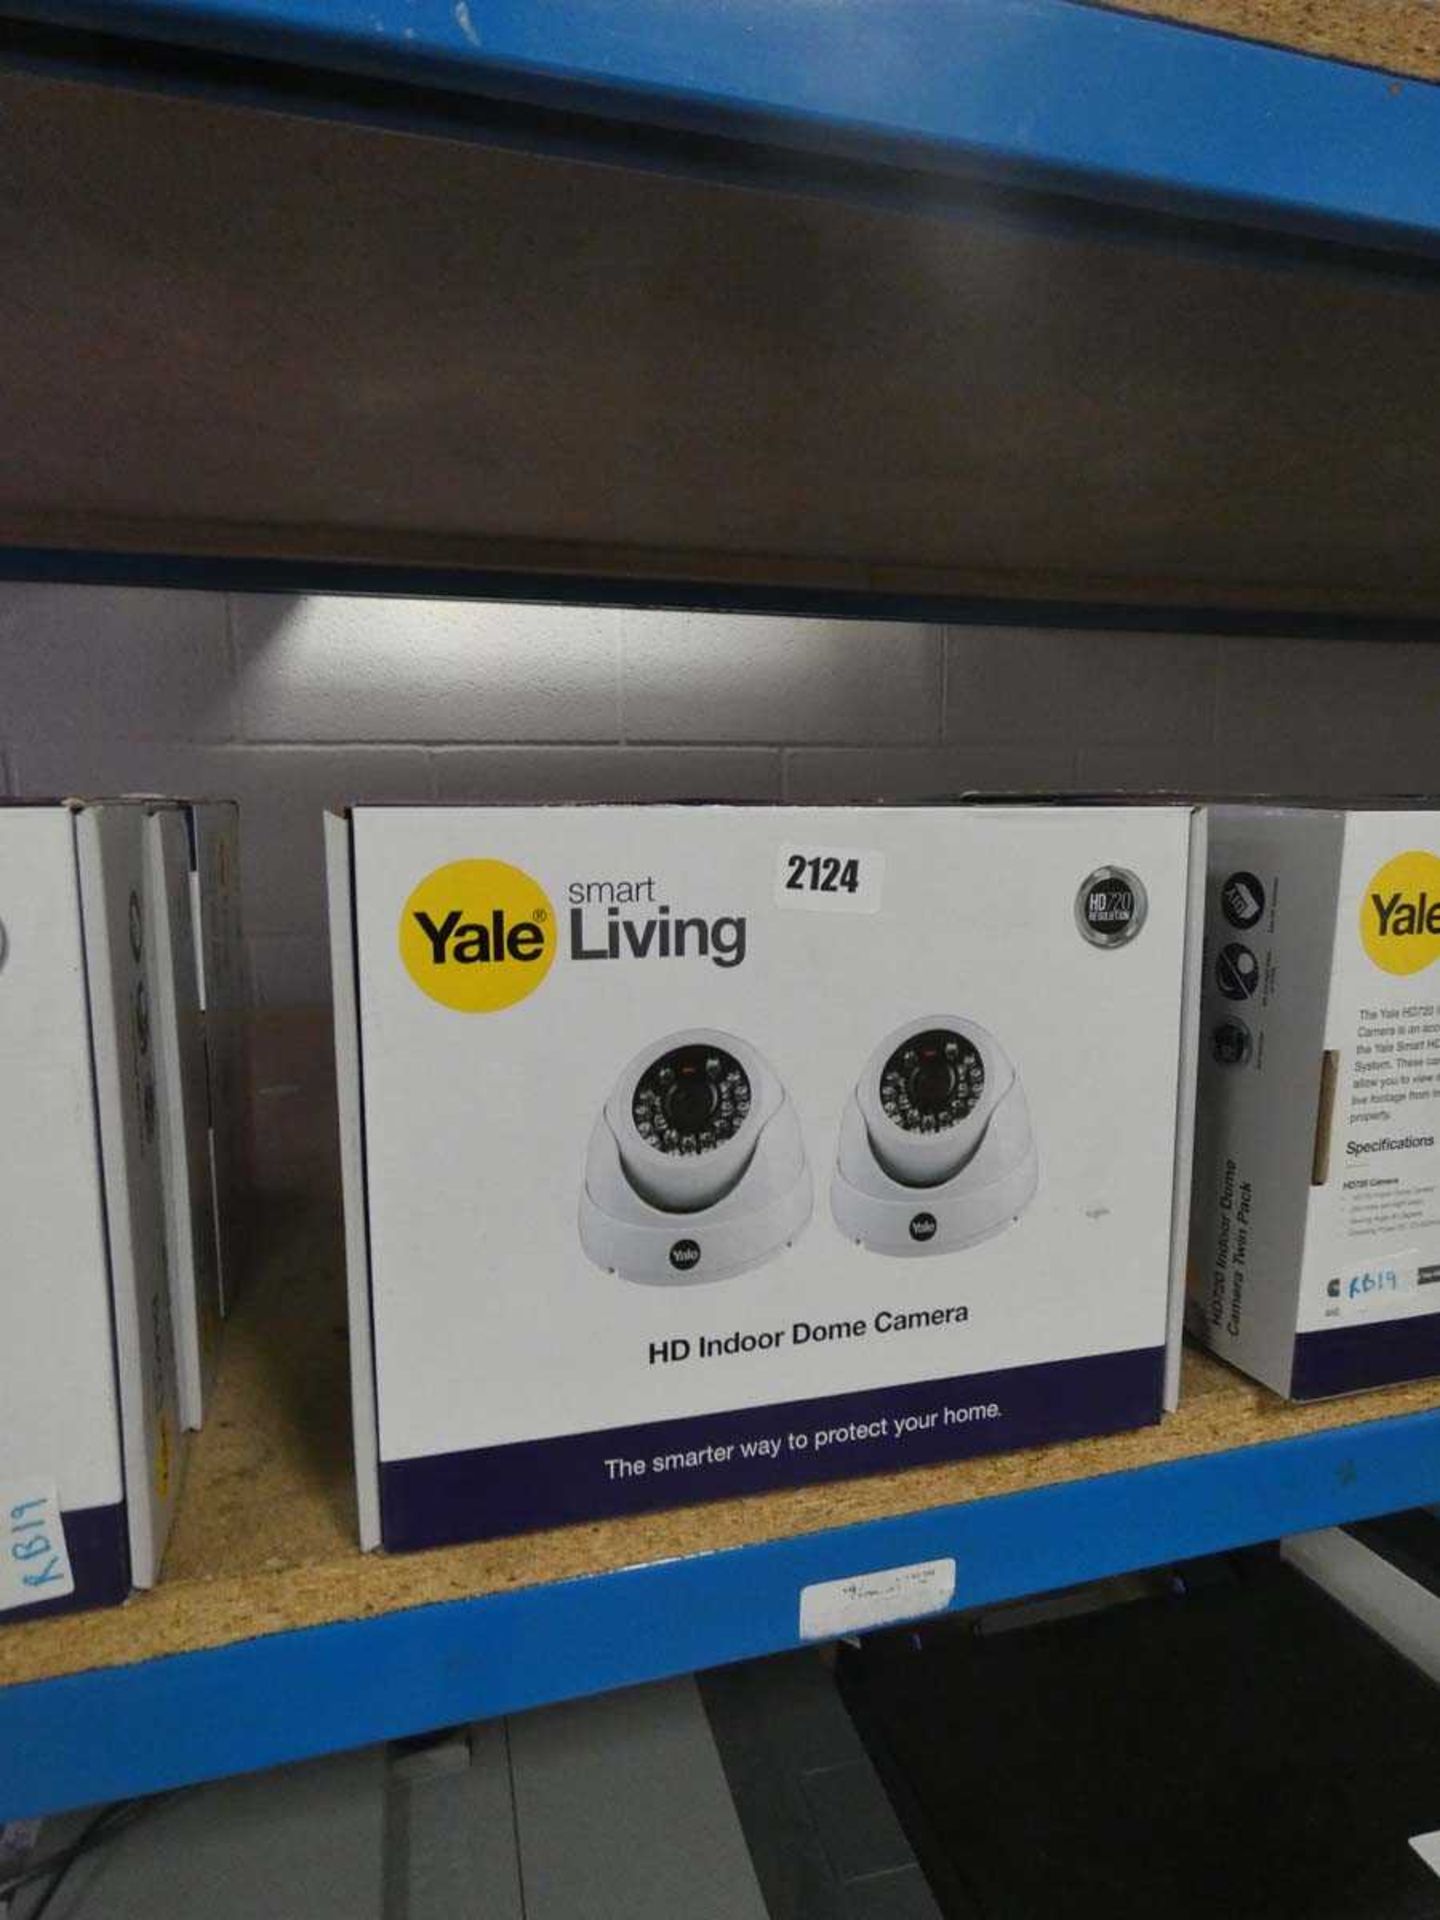 4 boxes of Yale Smart Living HD indoor dome camera sets